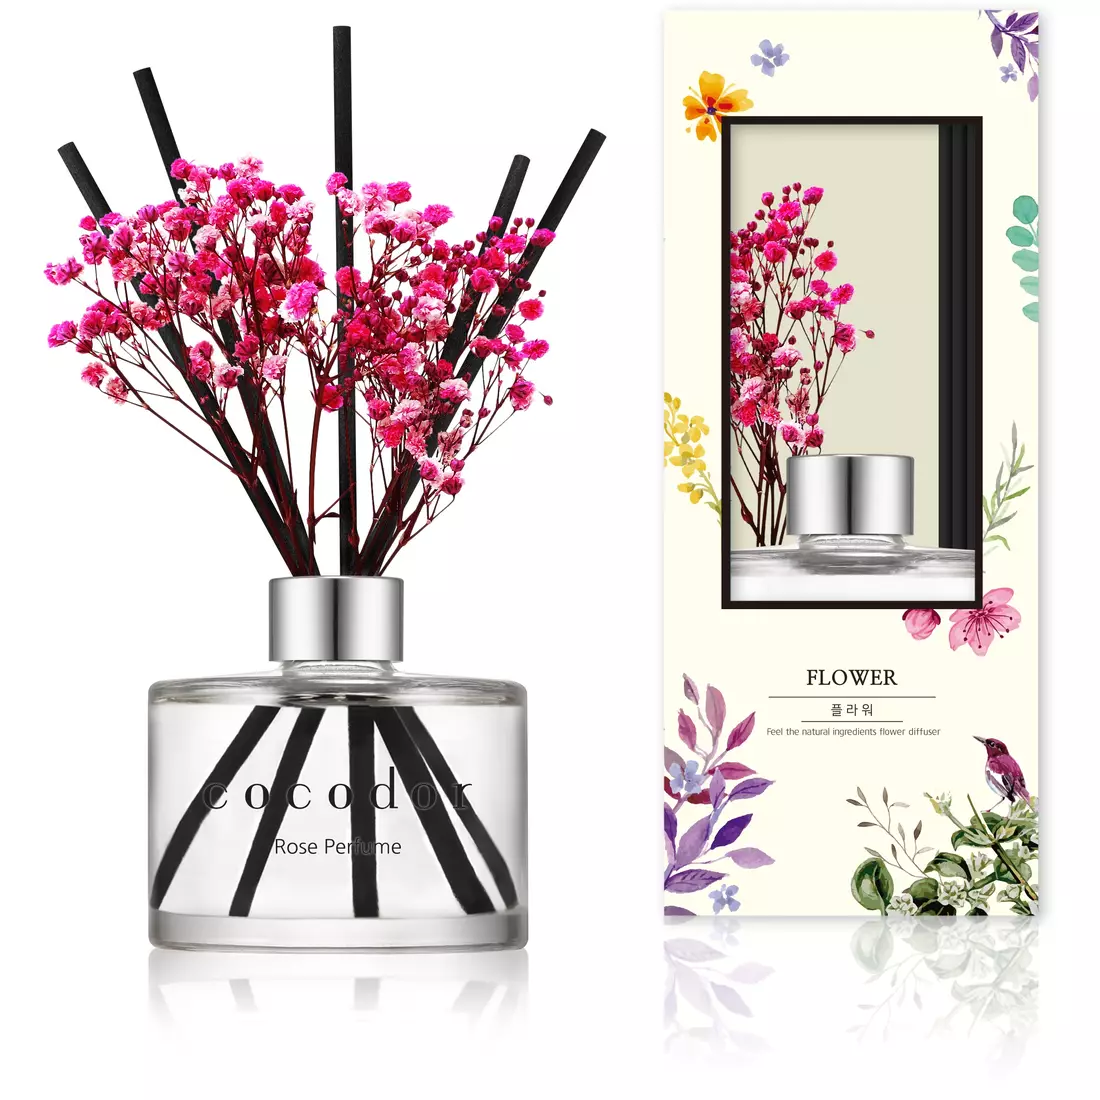 COCODOR aroma diffuser with sticks and flowers, rose perfume 200 ml